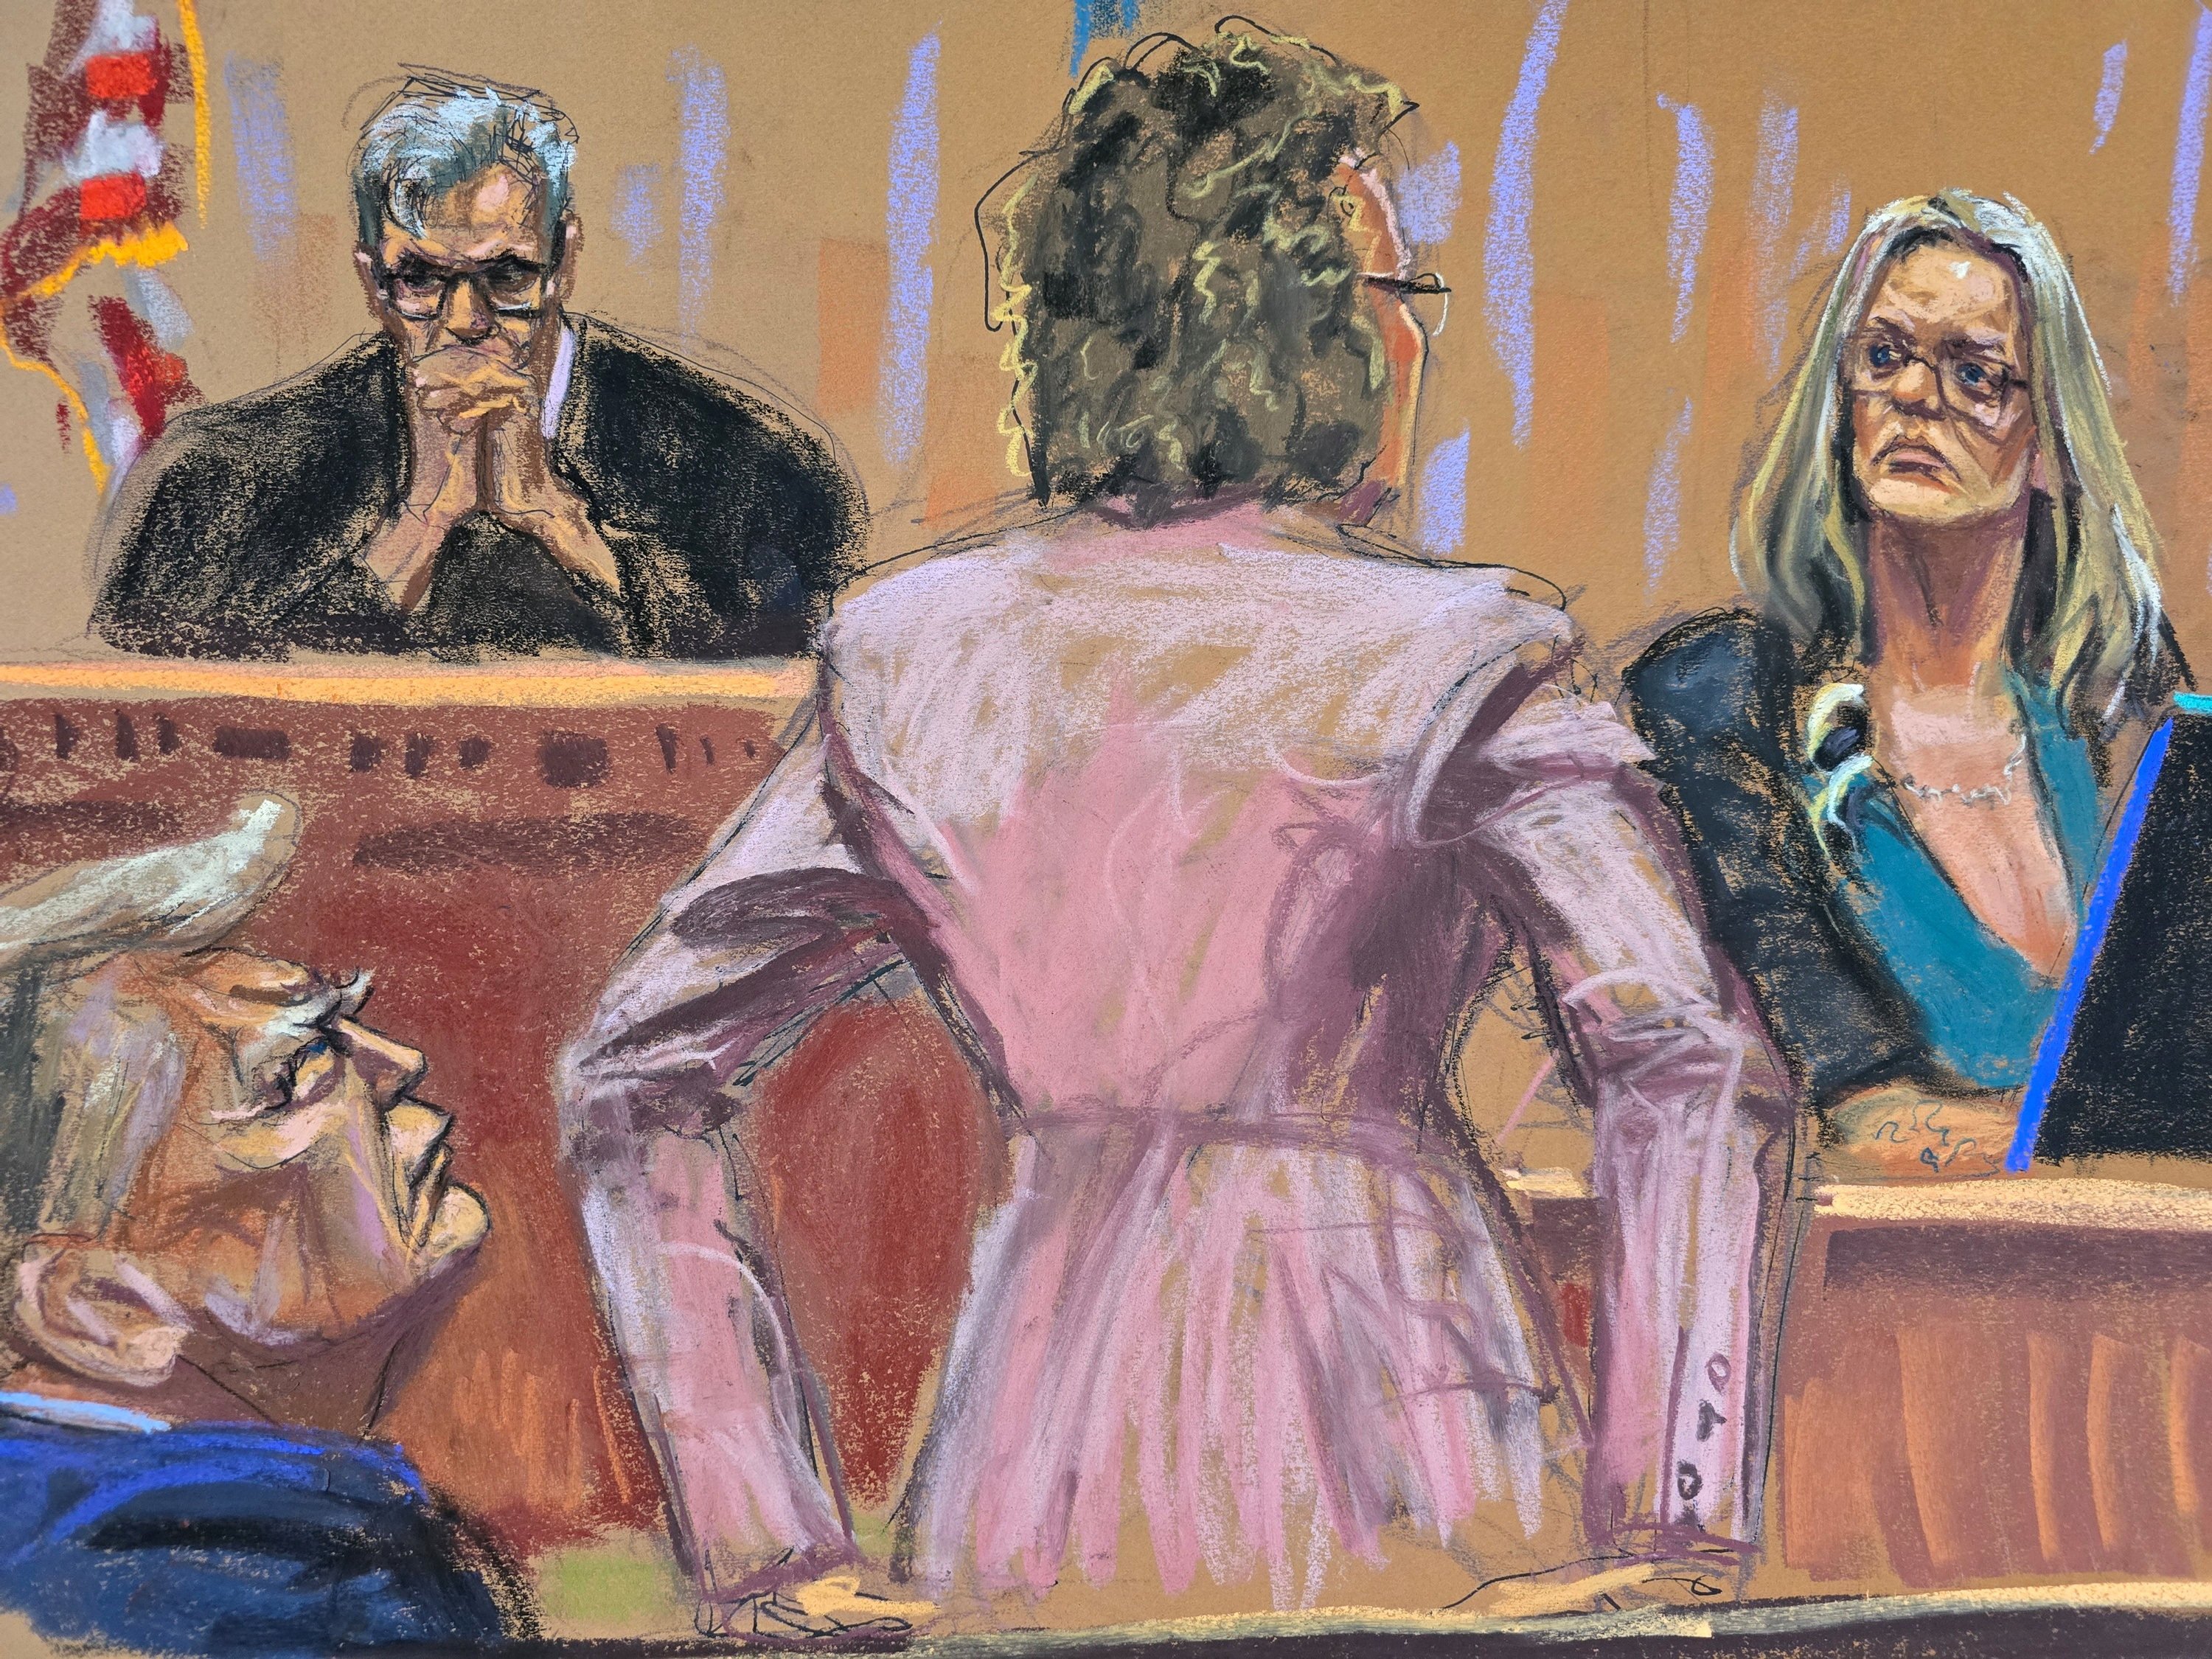 Stormy Daniels is questioned by defence lawyer Susan Necheles in New York on Thursday. Courtroom sketch: Jane Rosenberg via Reuters